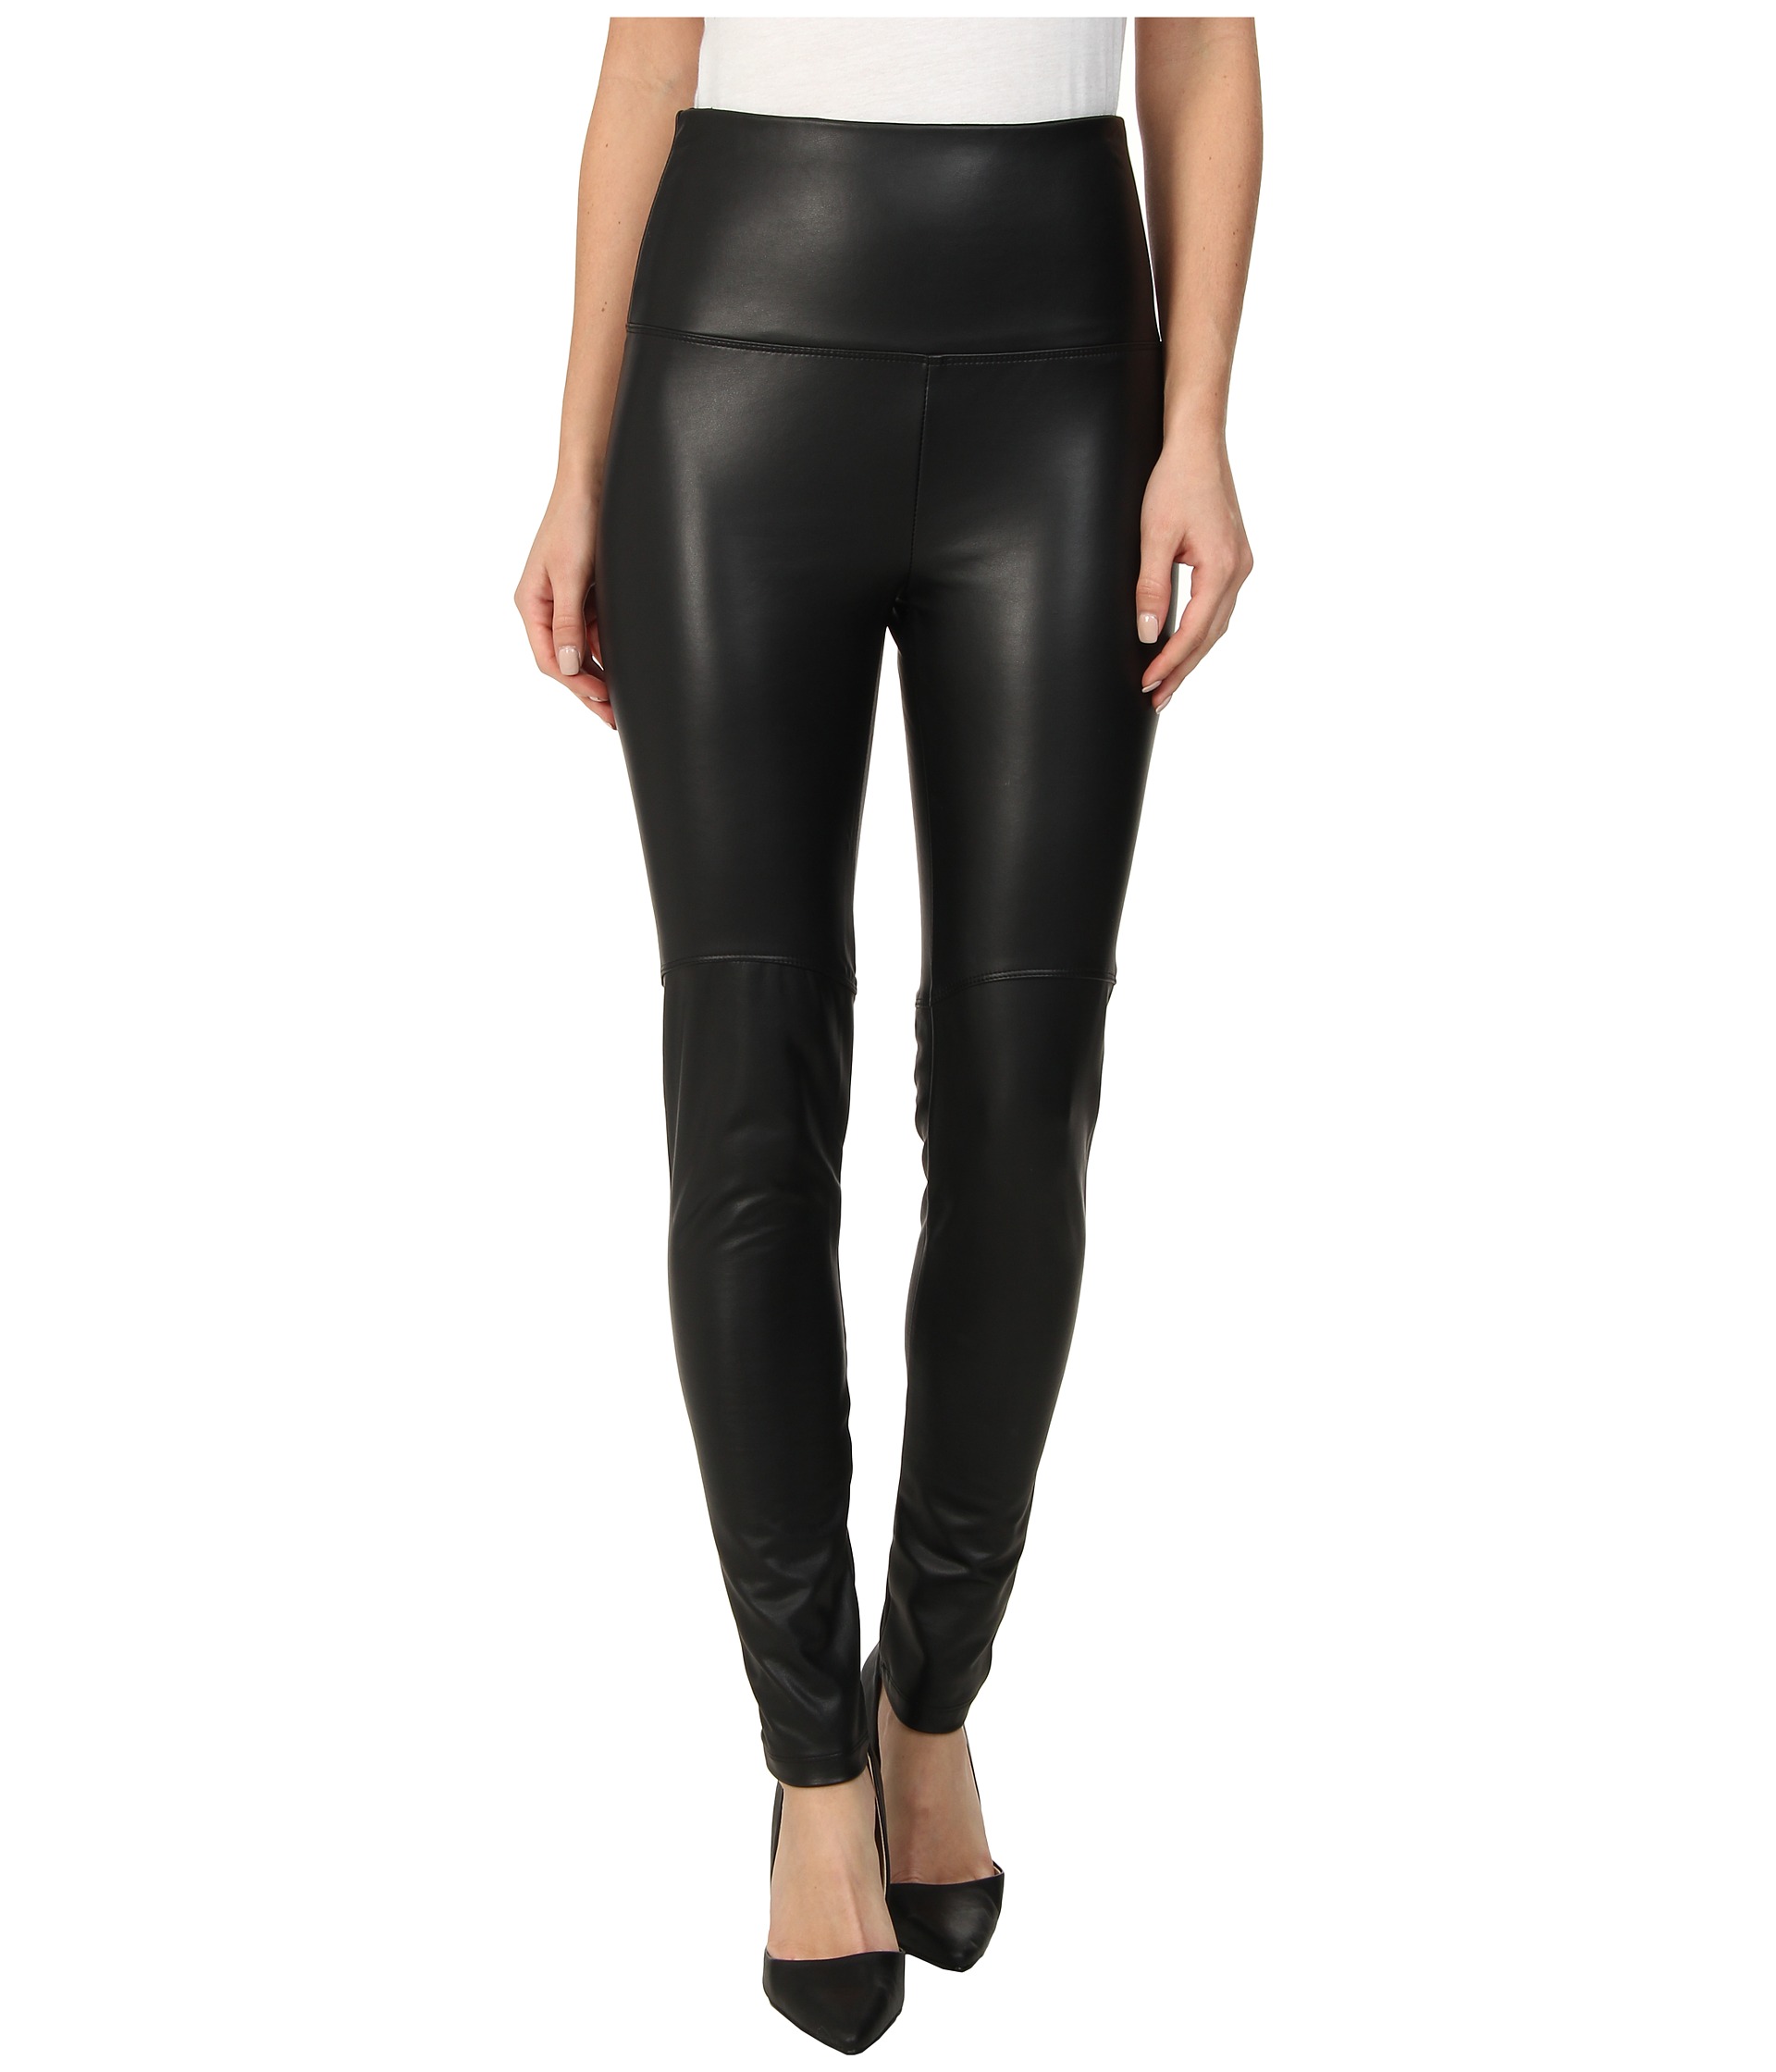 Lysse Faux Leather Shaping Legging at Zappos.com